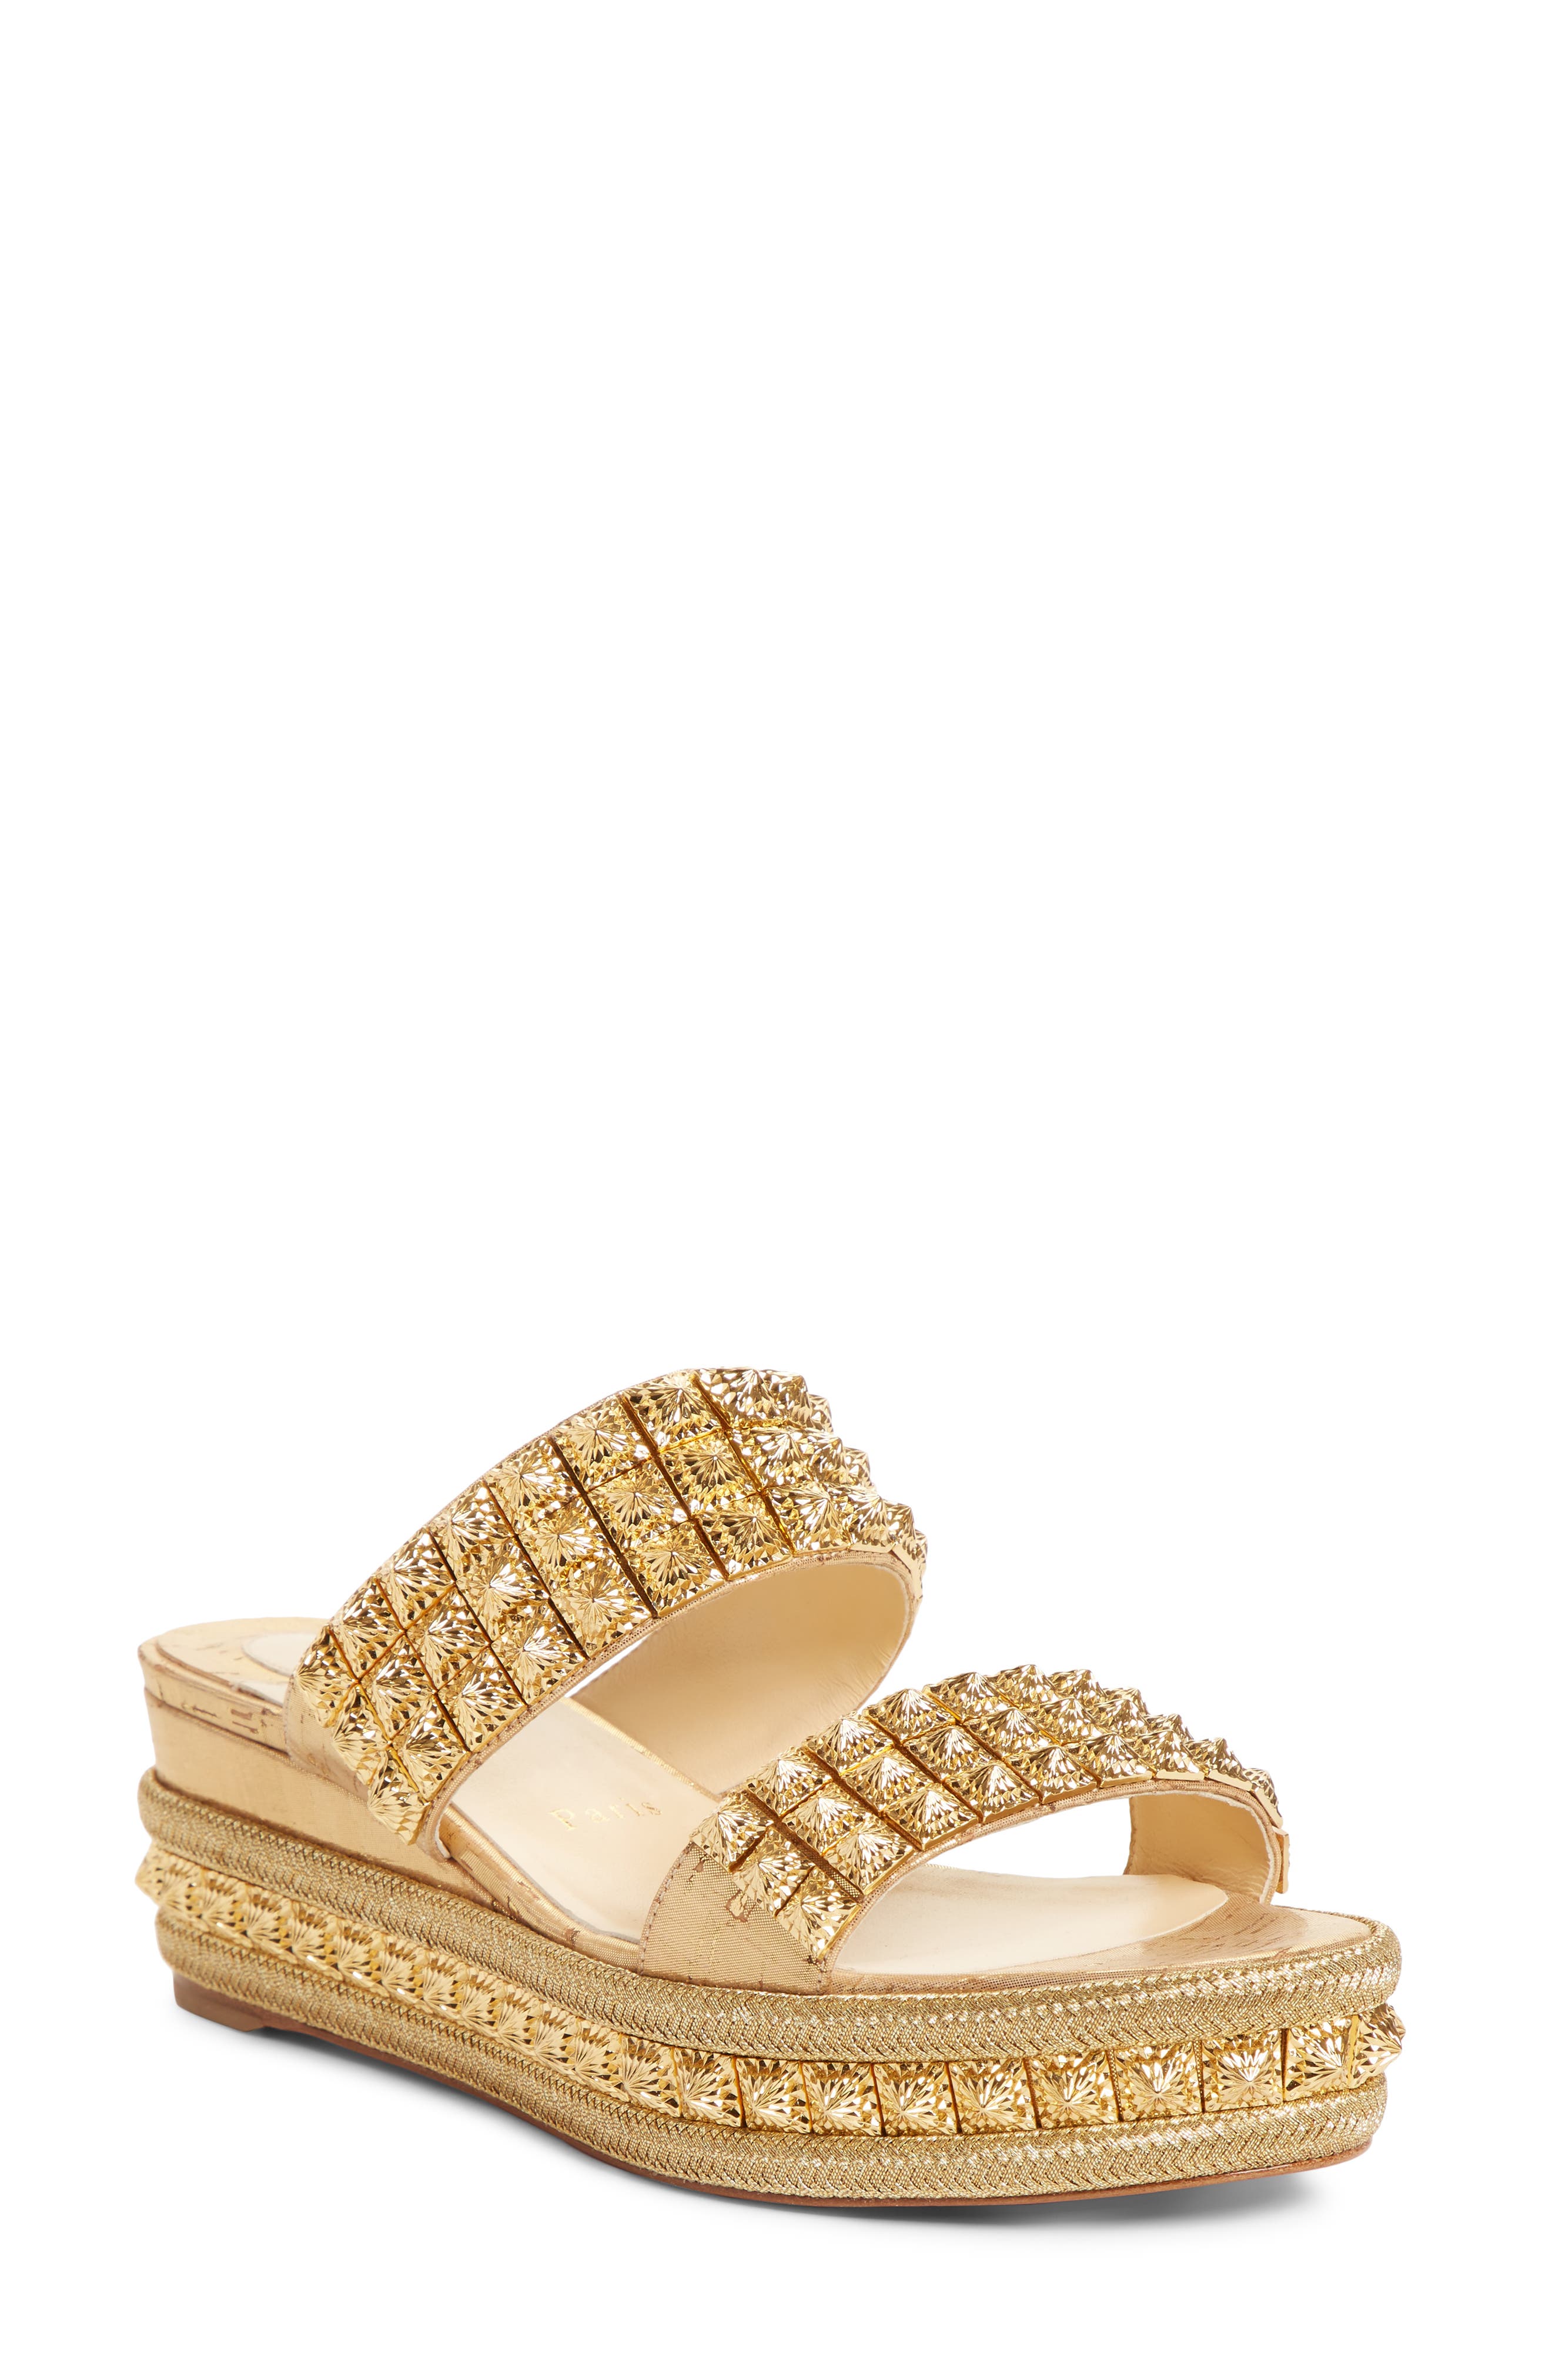 louboutin gold wedges